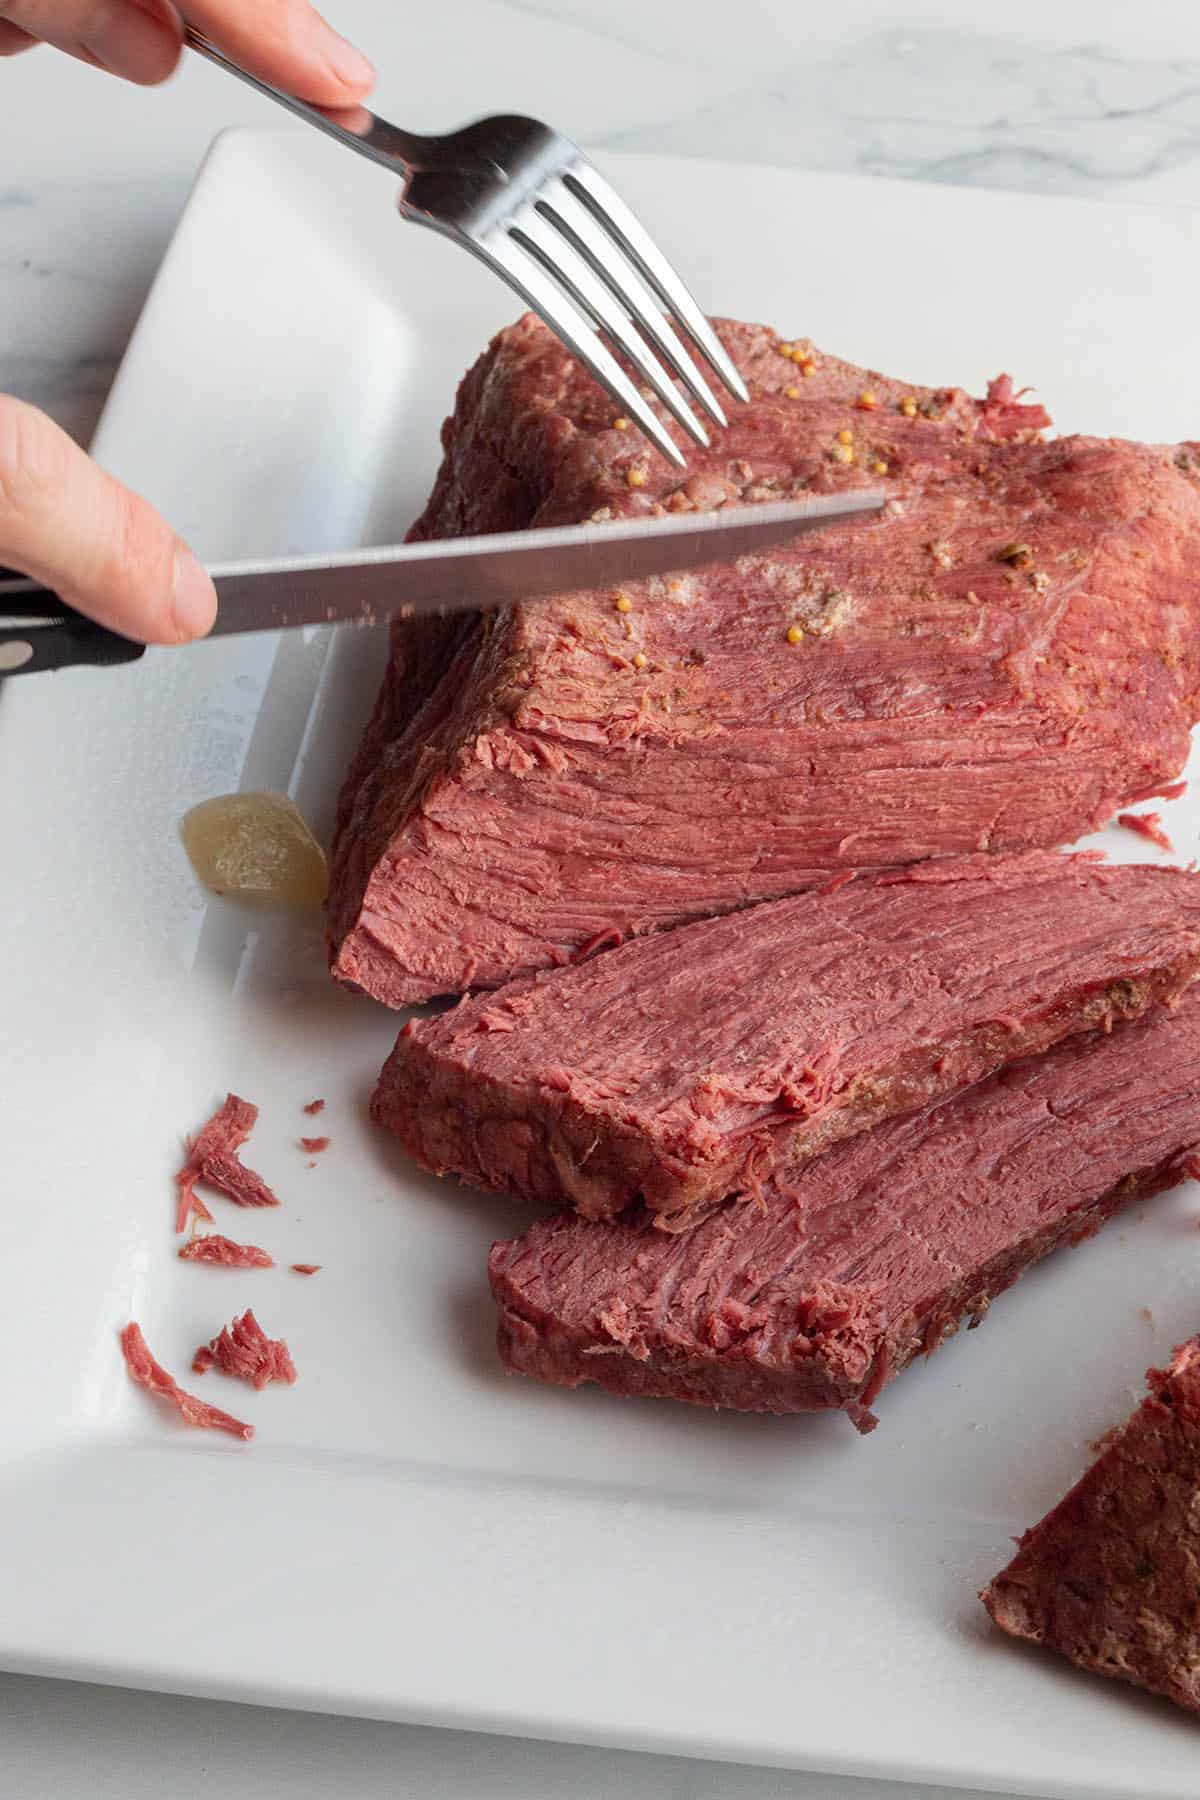 A plate with a corned beef brisket being cut into slices.